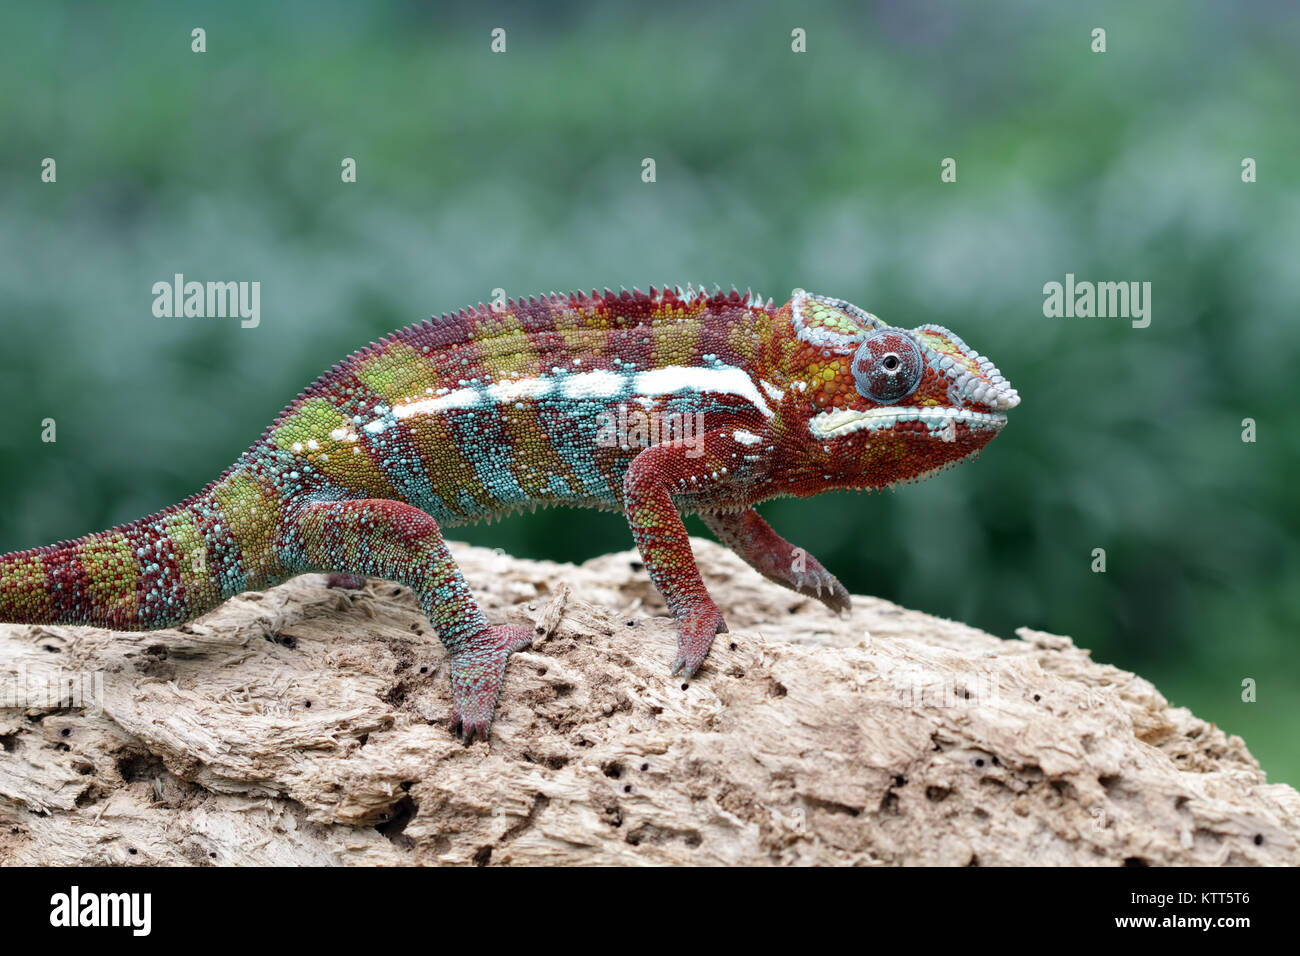 Panther Chameleon on a rock, Indonesia Stock Photo